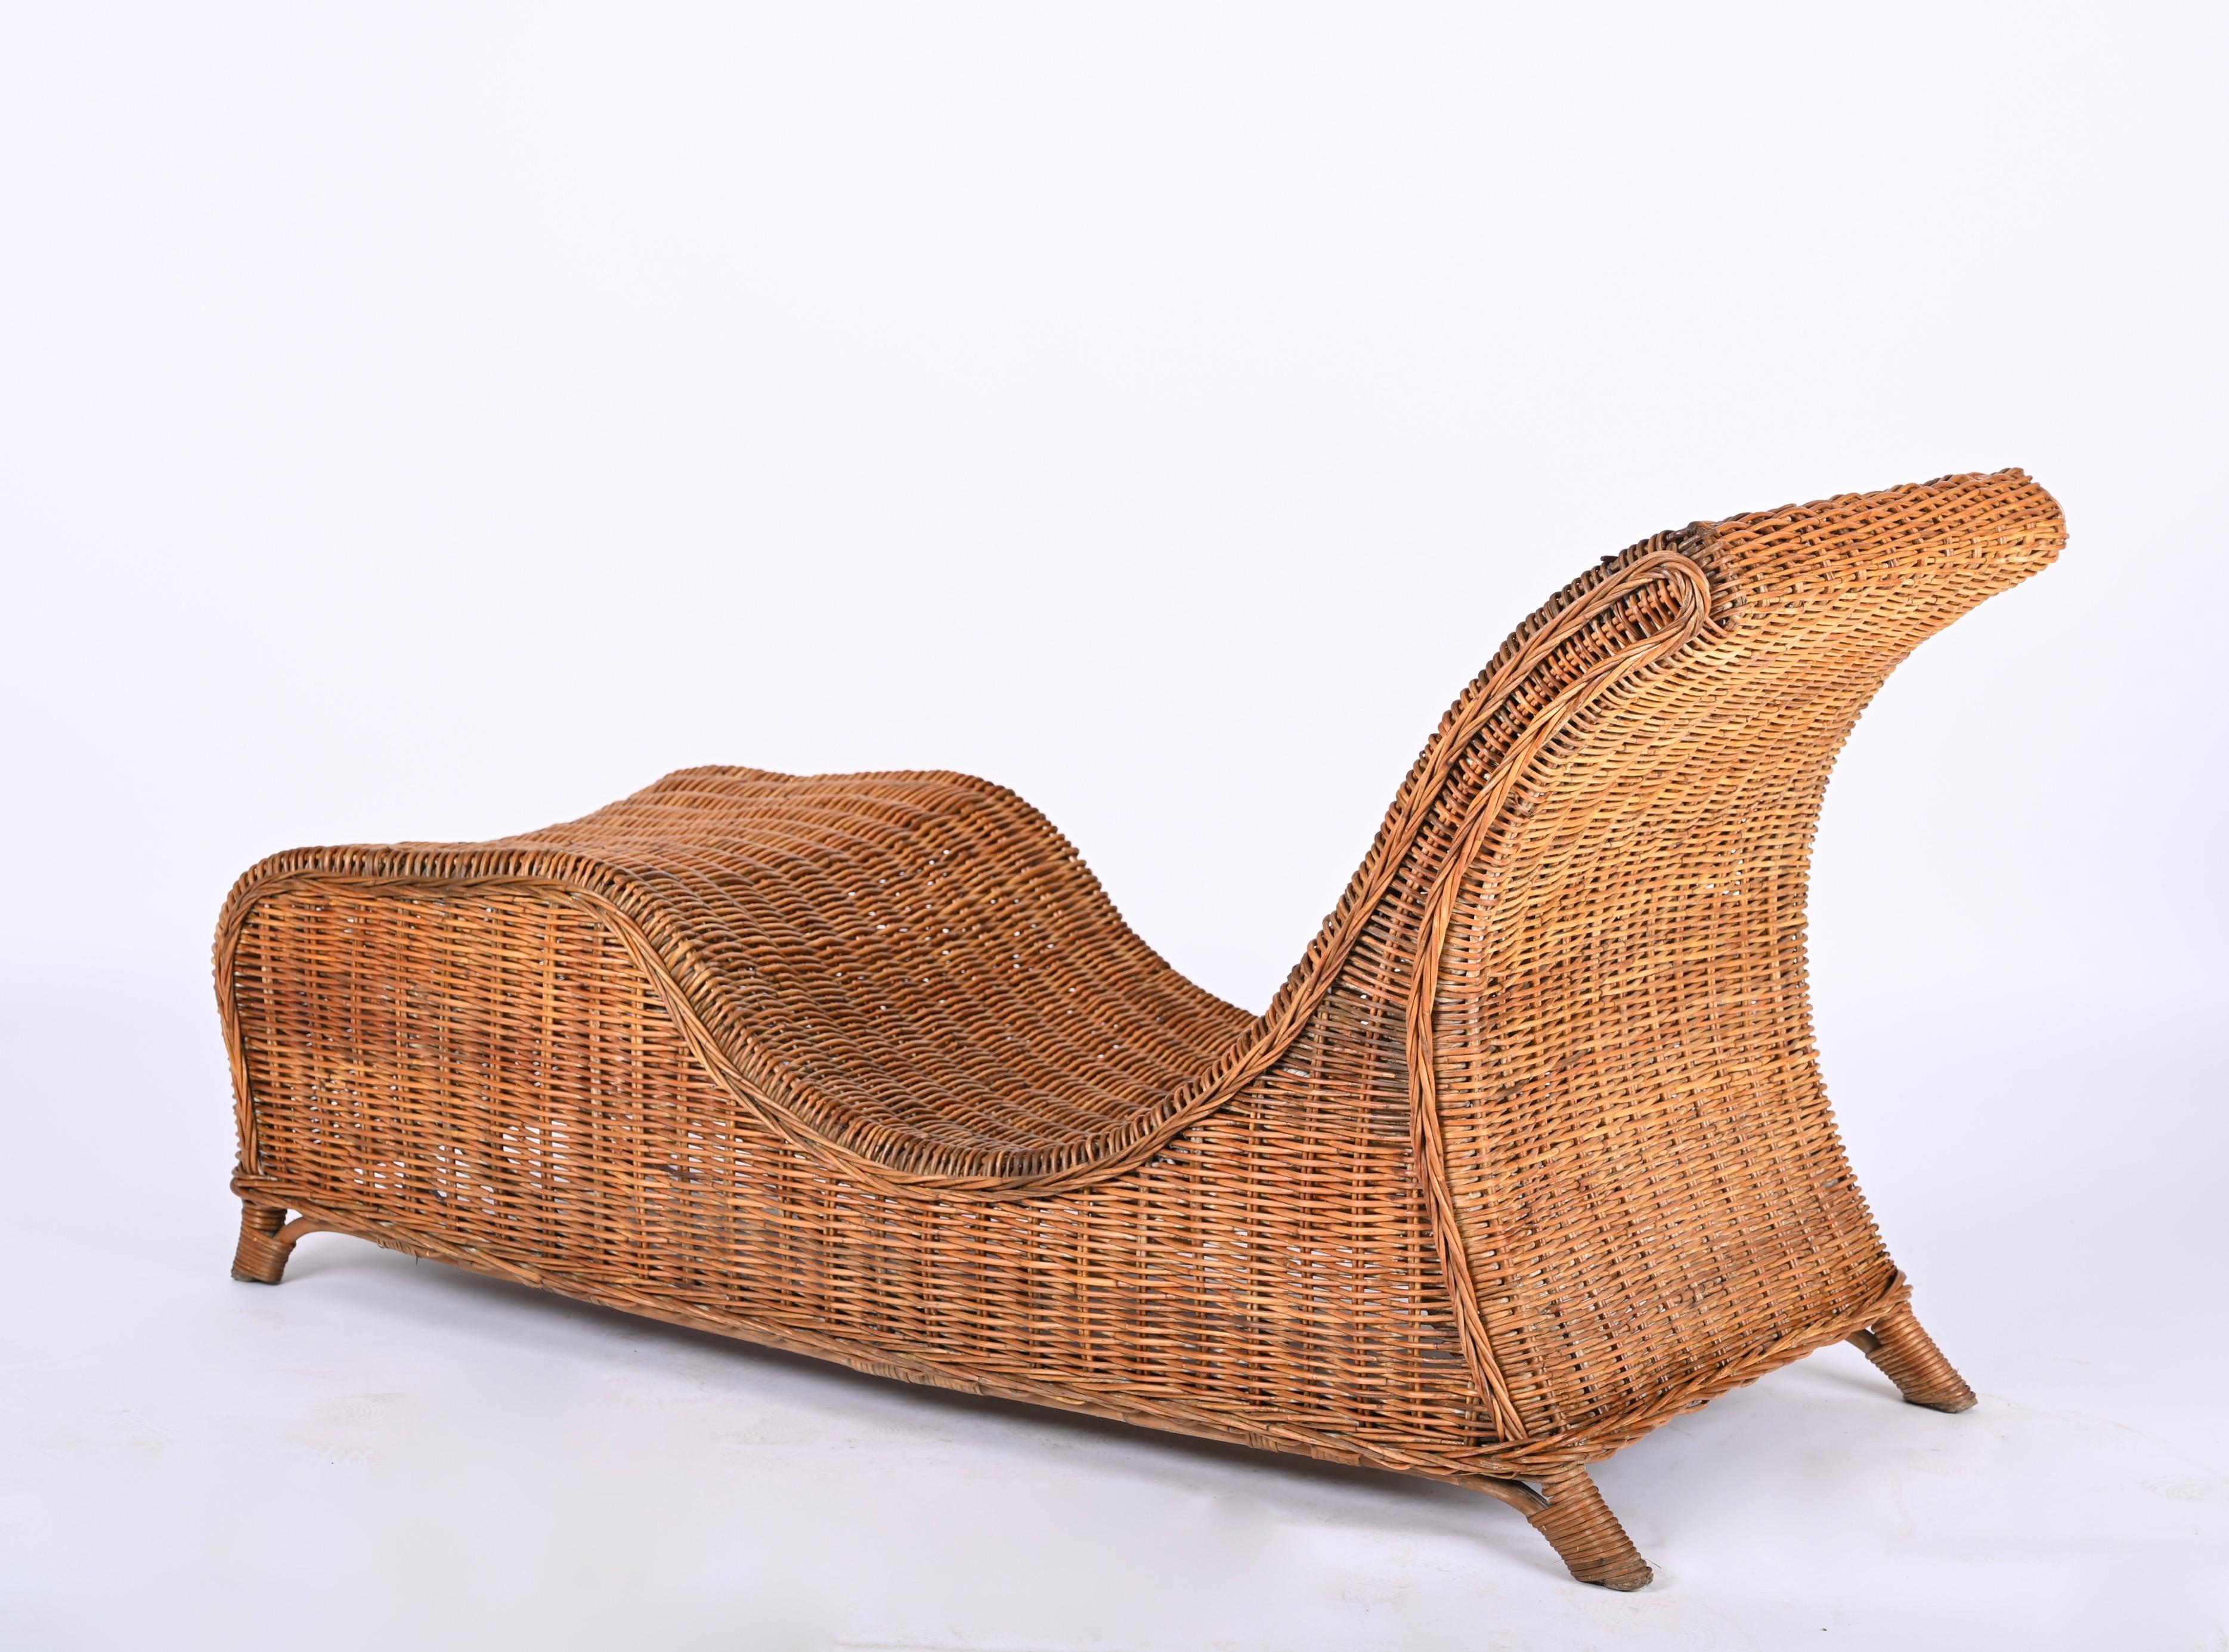 Midcentury Modern Bamboo and Wicker Italian Chaise Longue, 1960s For Sale 8